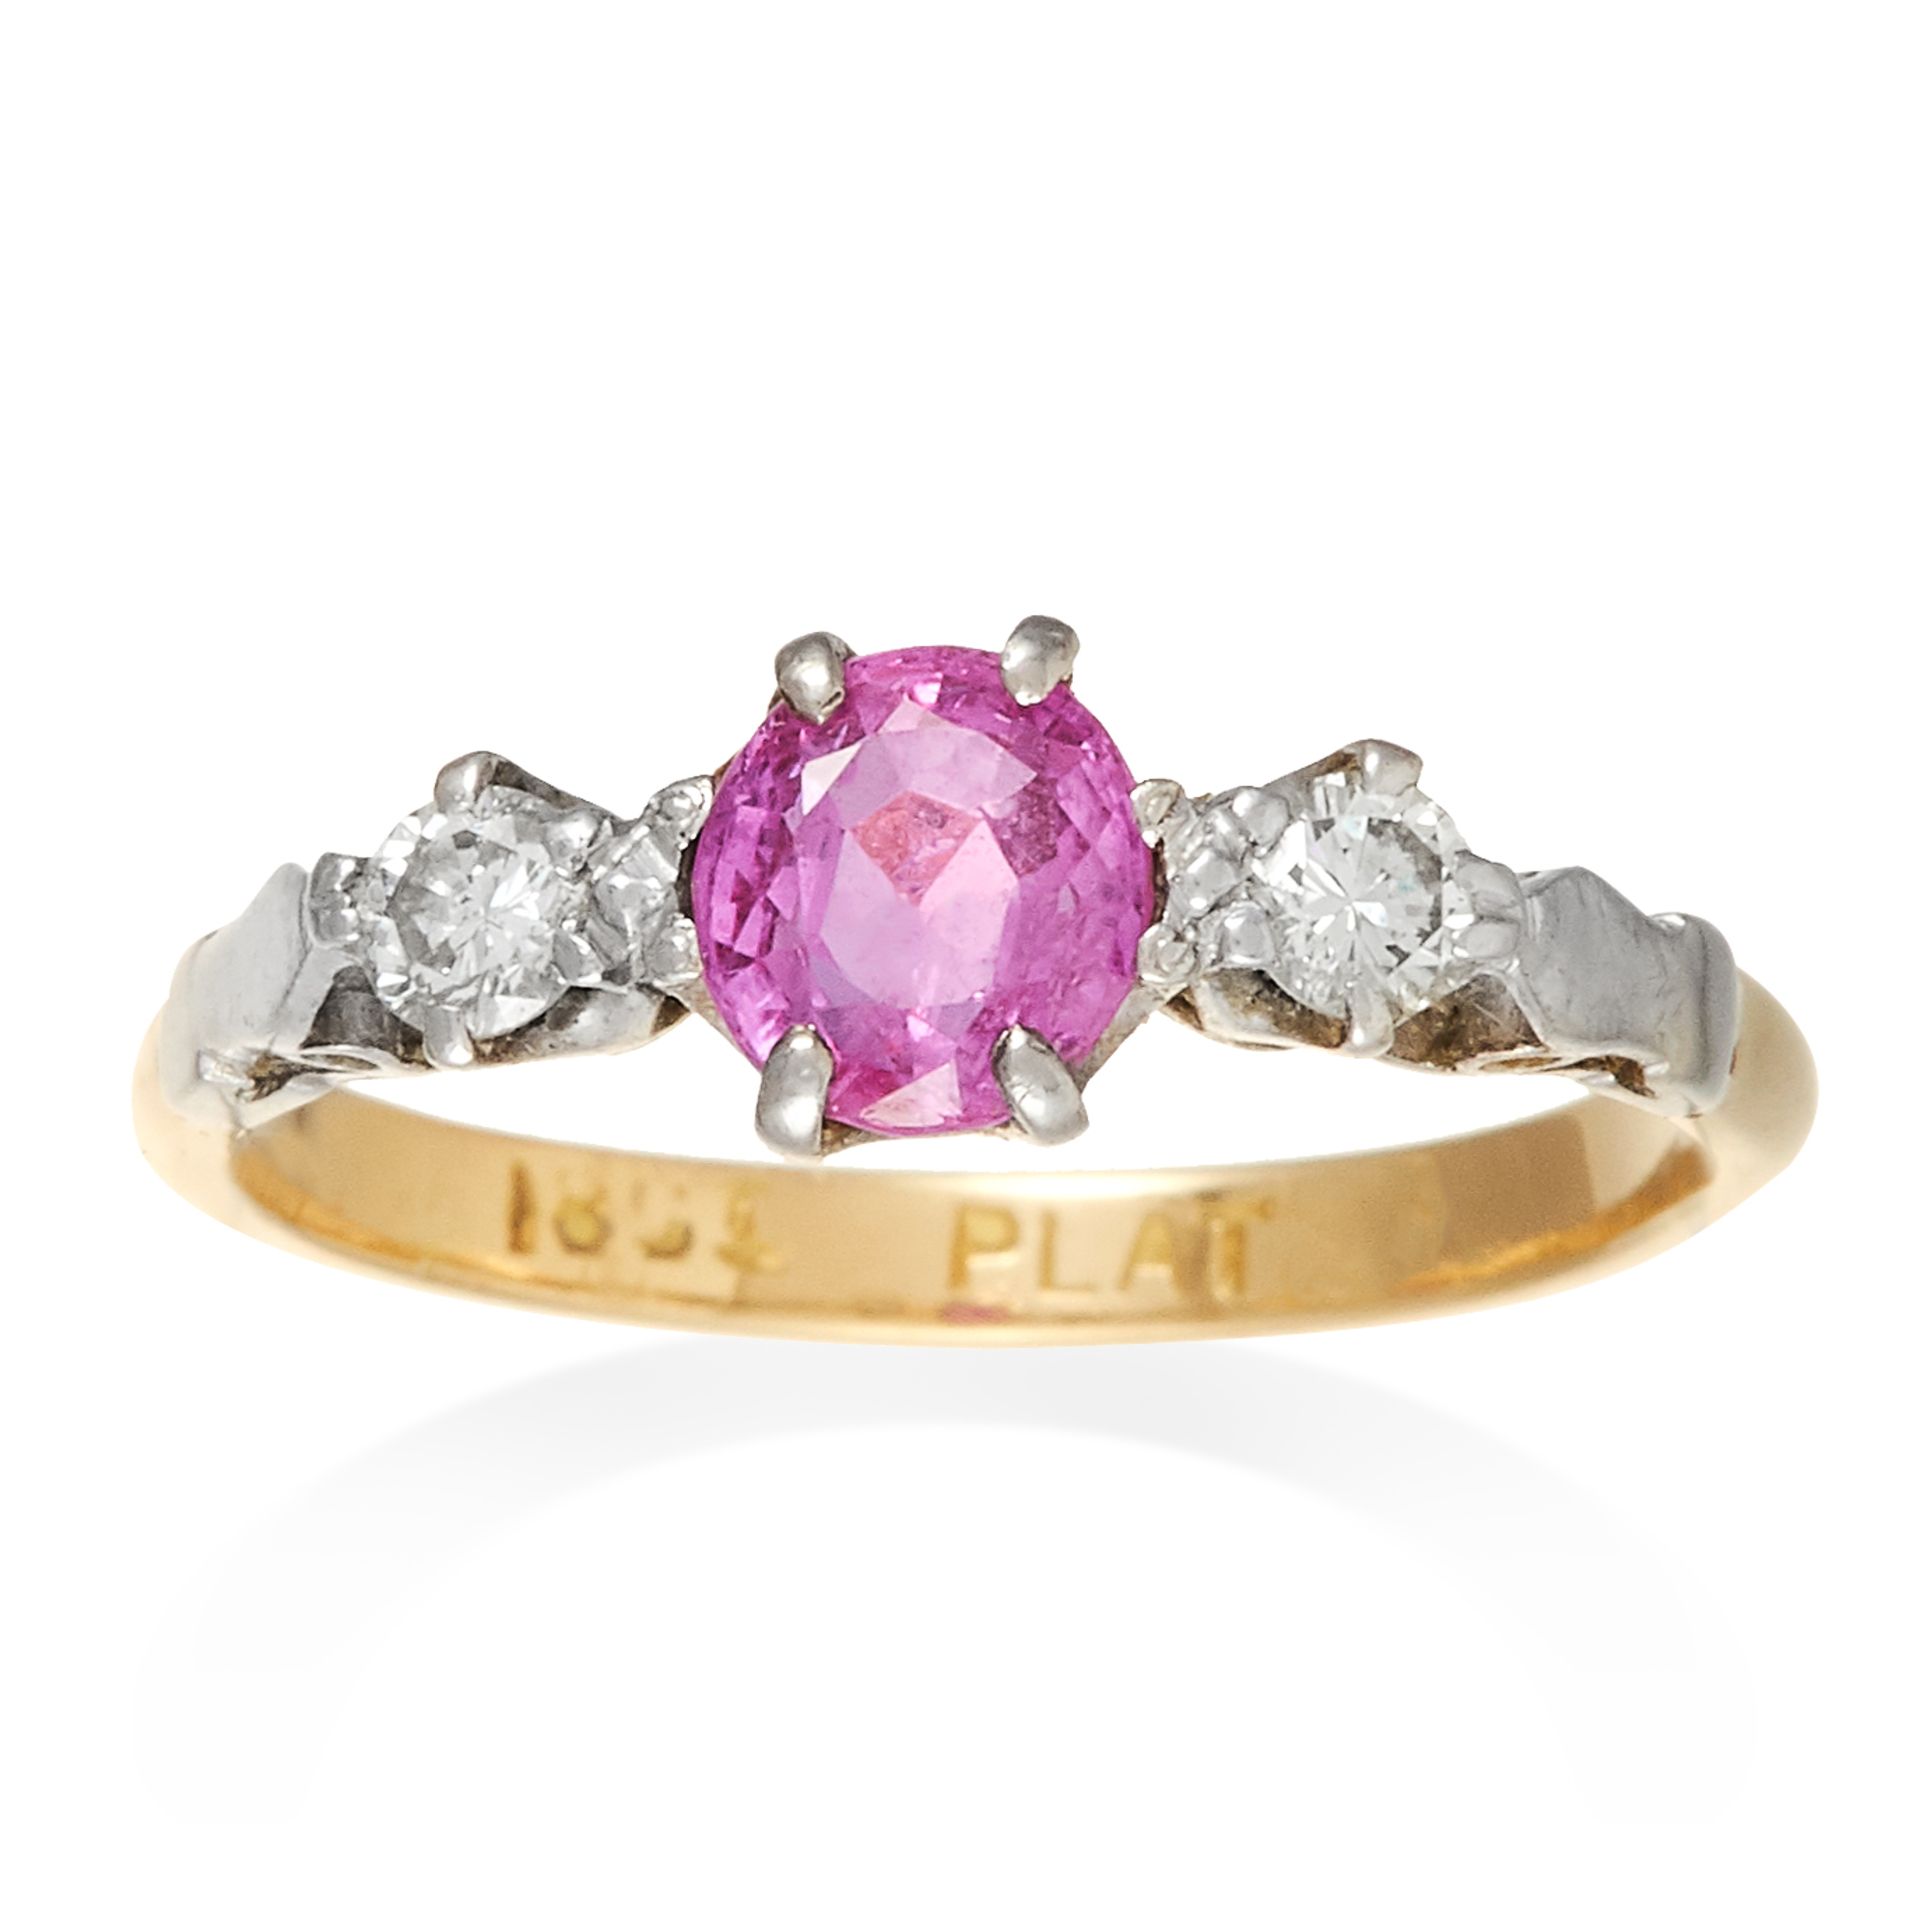 AN ANTIQUE PINK SAPPHIRE AND DIAMOND THREE STONE RING in 18ct yellow gold and platinum, the oval cut